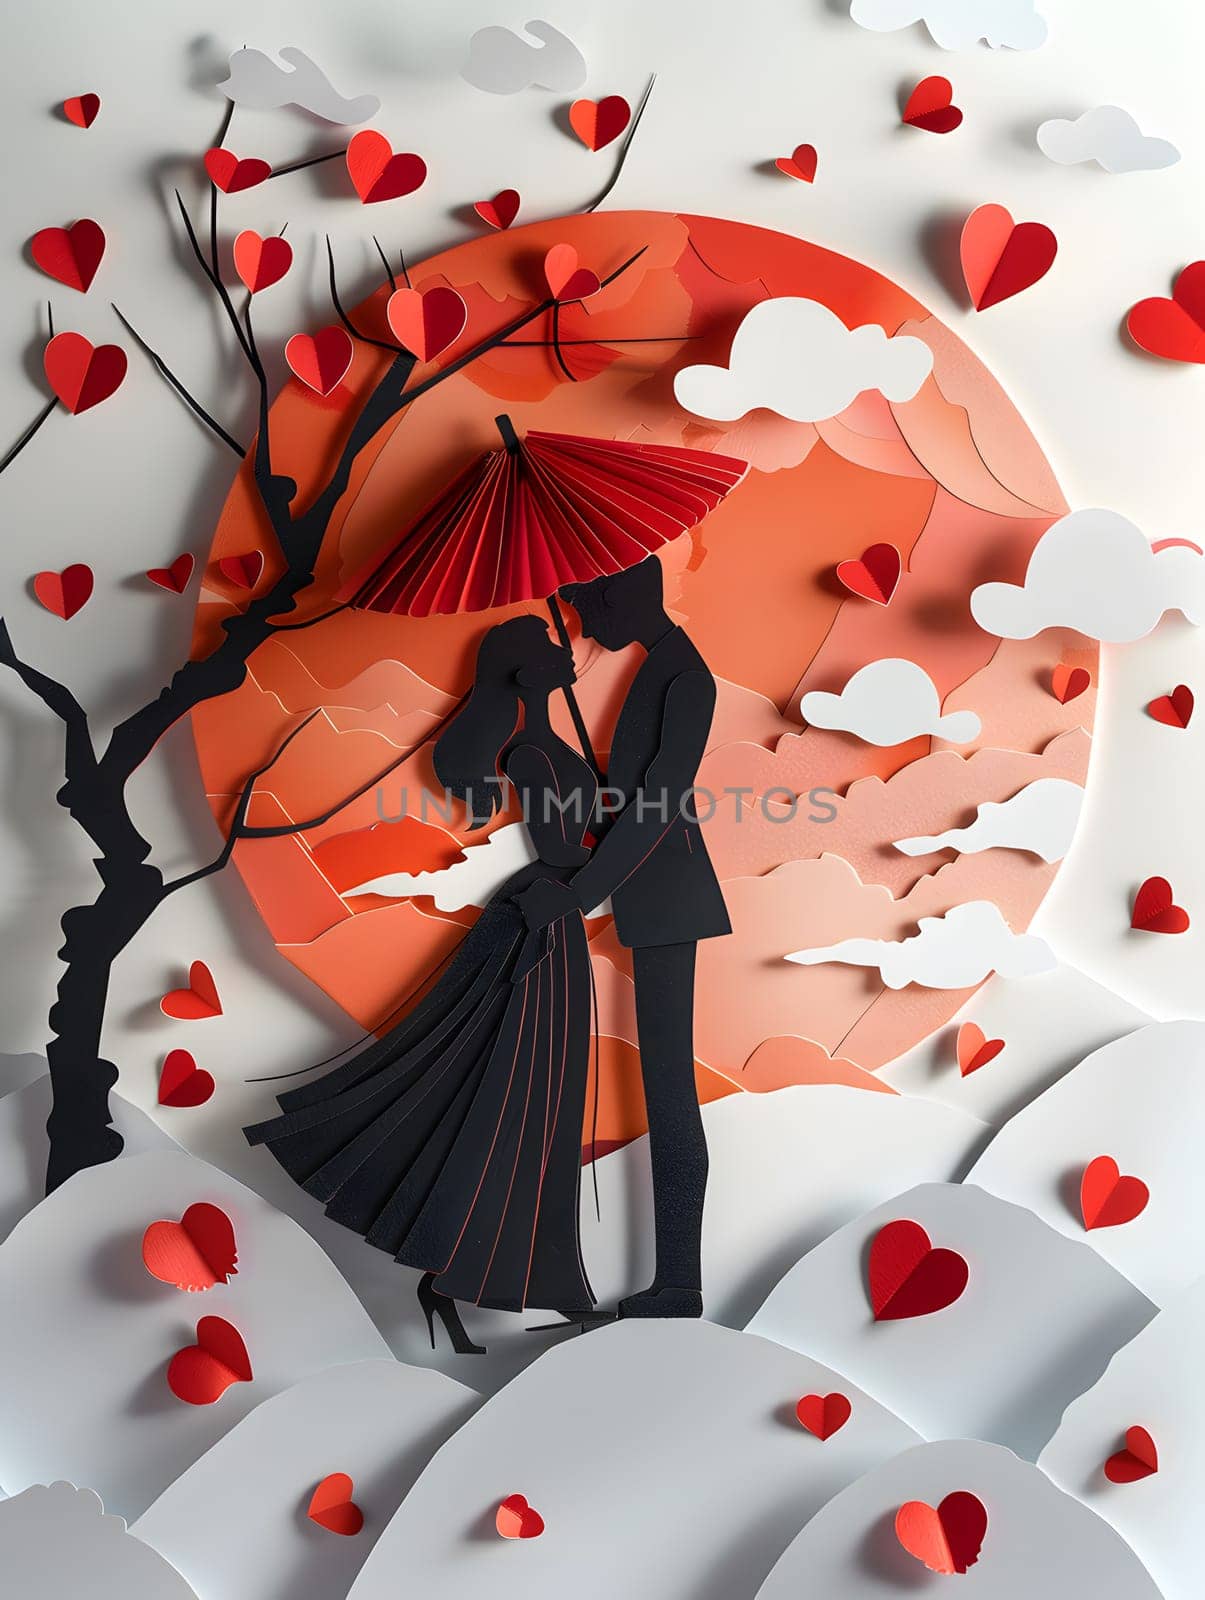 An intricate paper cut artwork depicting a man and woman kissing under a red umbrella, surrounded by floral patterns and plant motifs